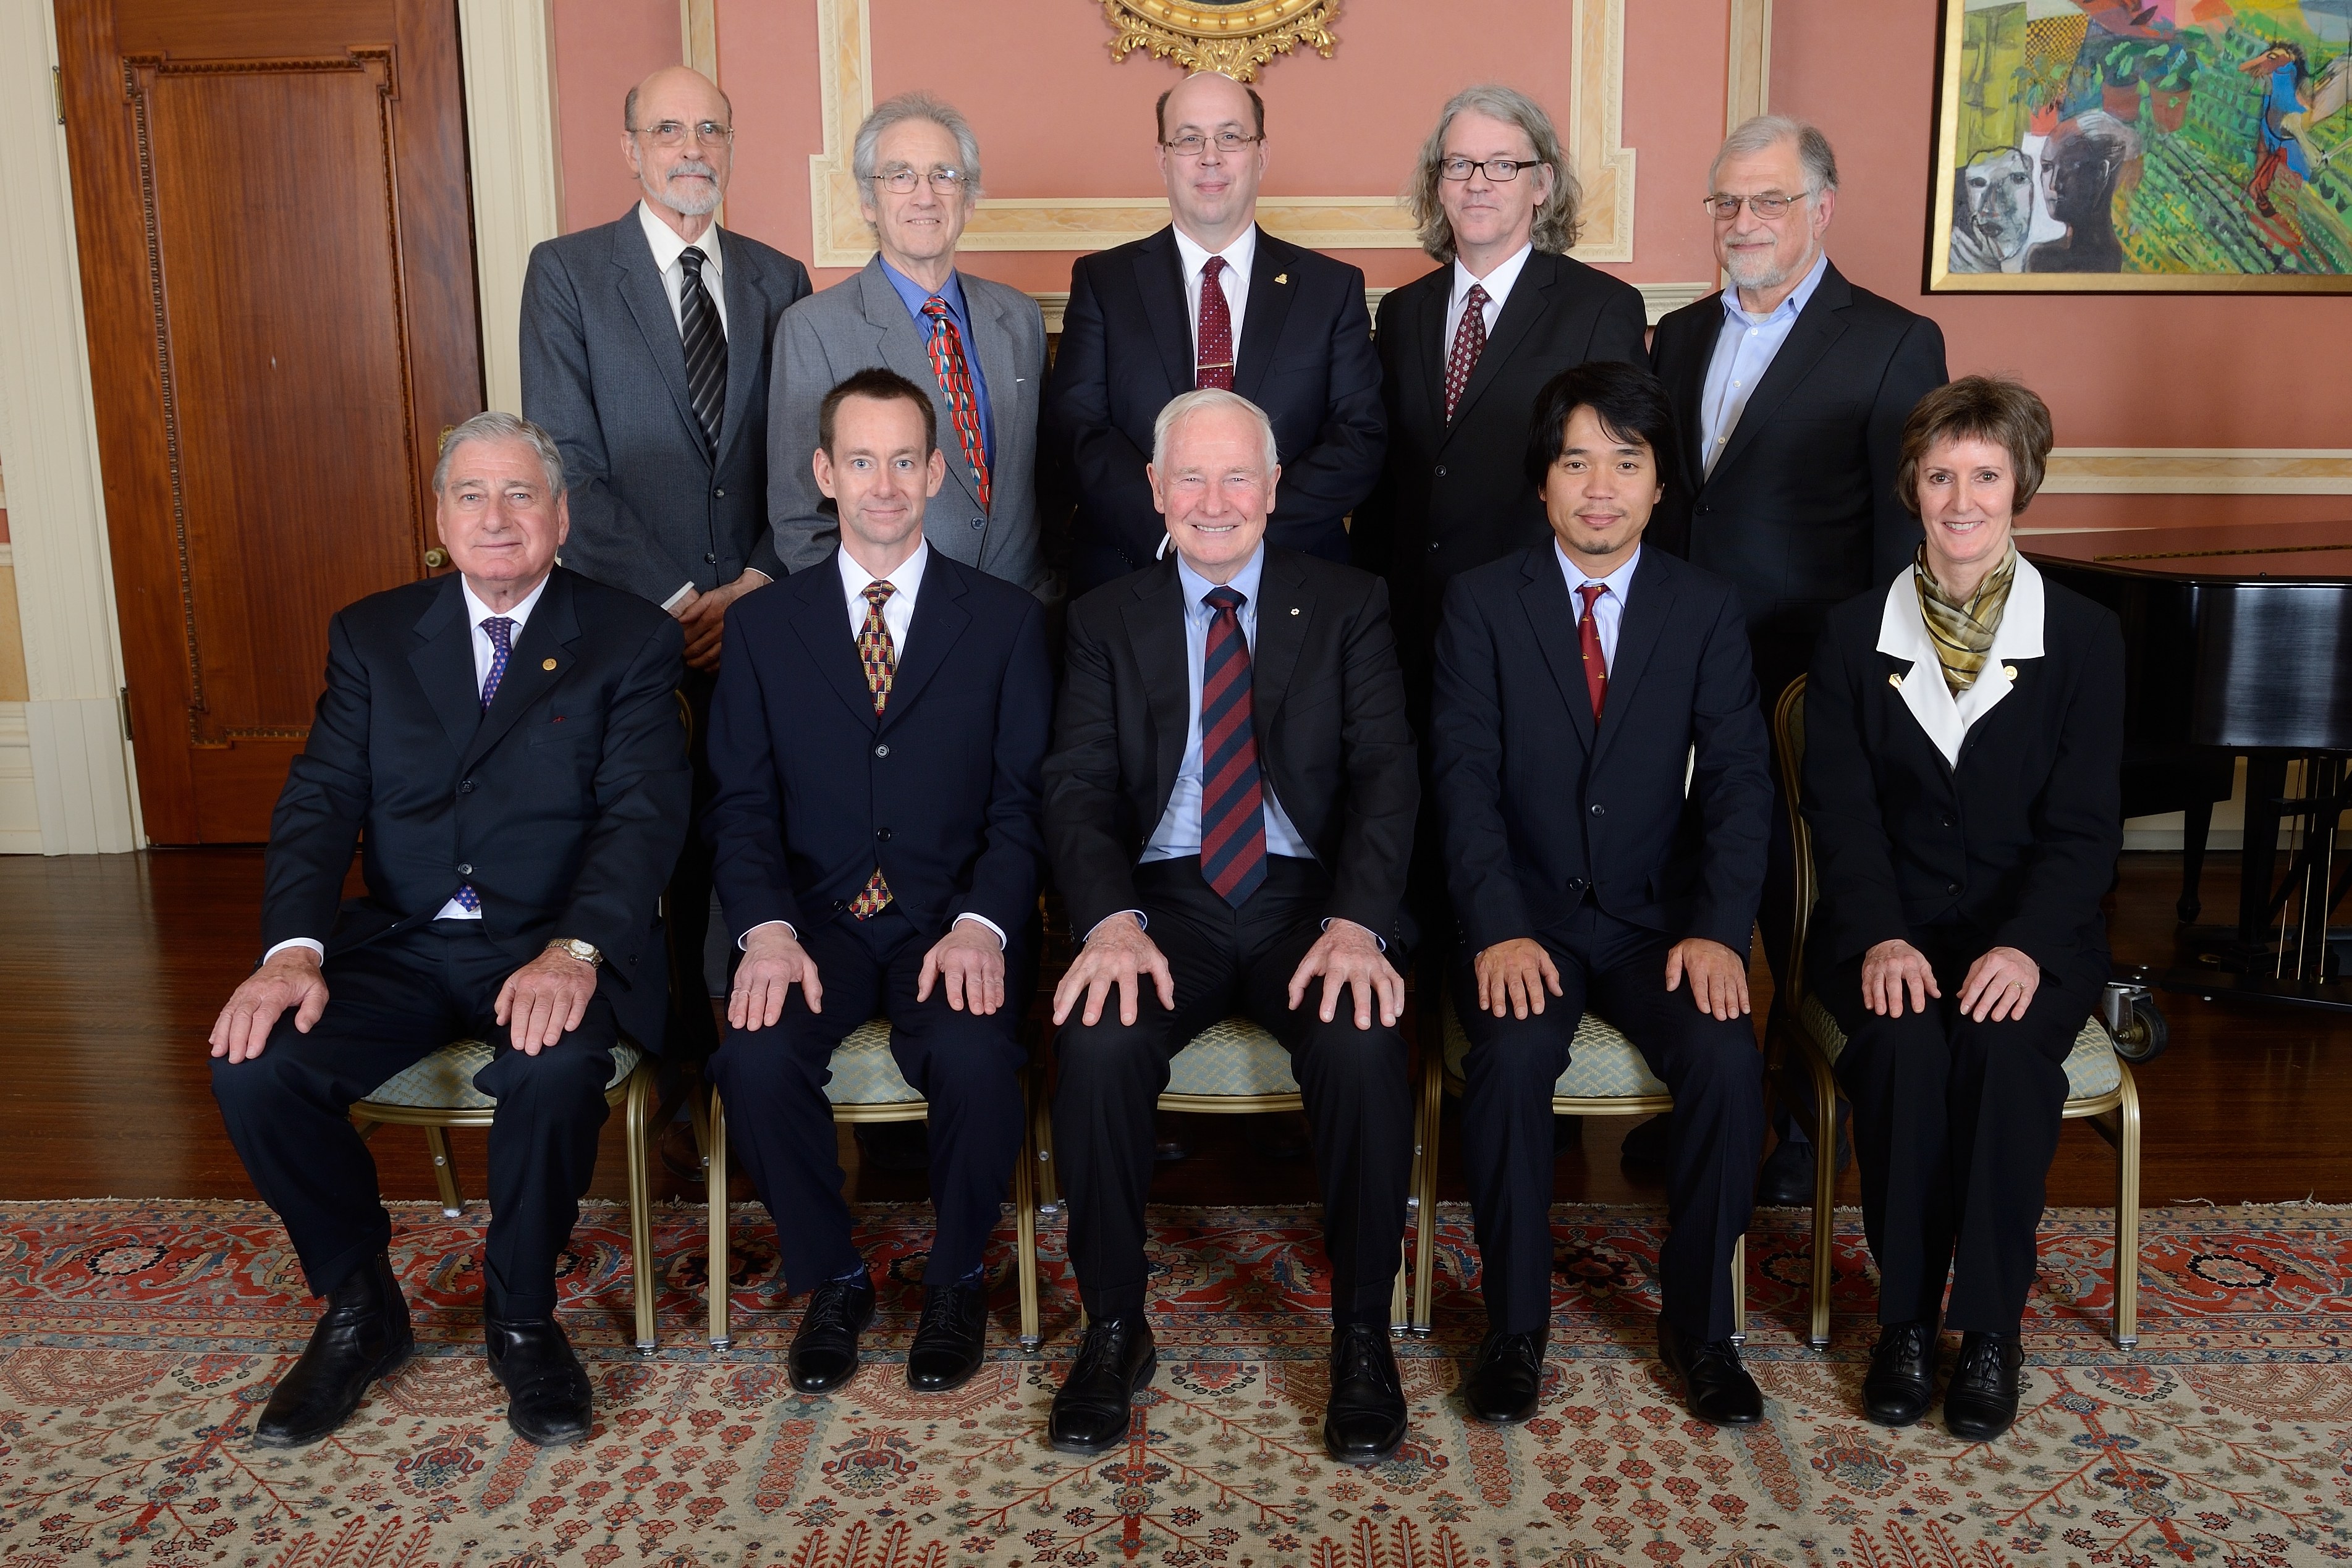 ALPHA Canada team upon receiving the NSERC Polanyi Prize in 2013. (credit NSERC).